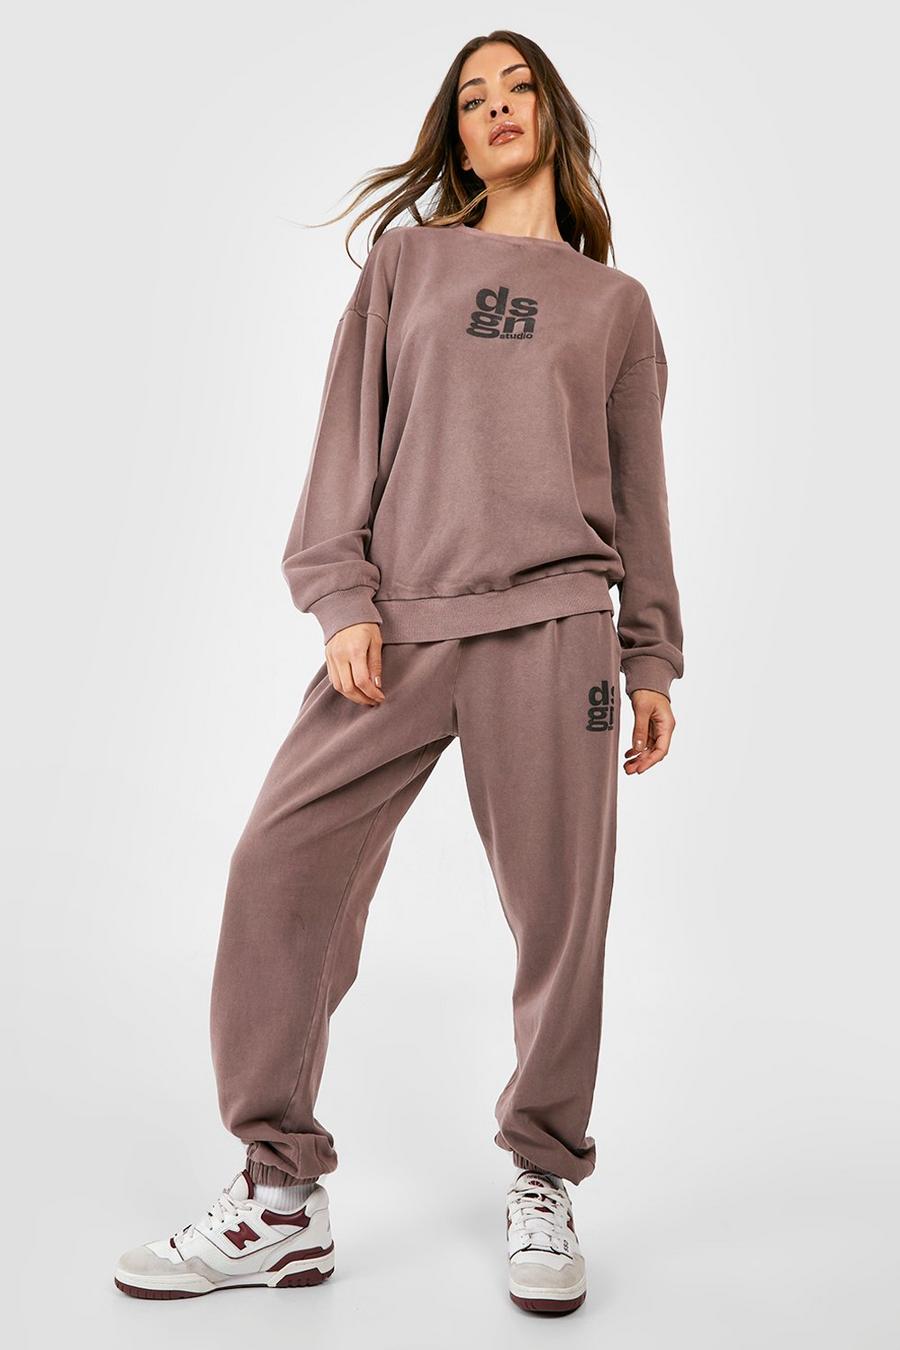 Dsgn Puff Print Overdyed Sweater Tracksuit, Chocolate marrón